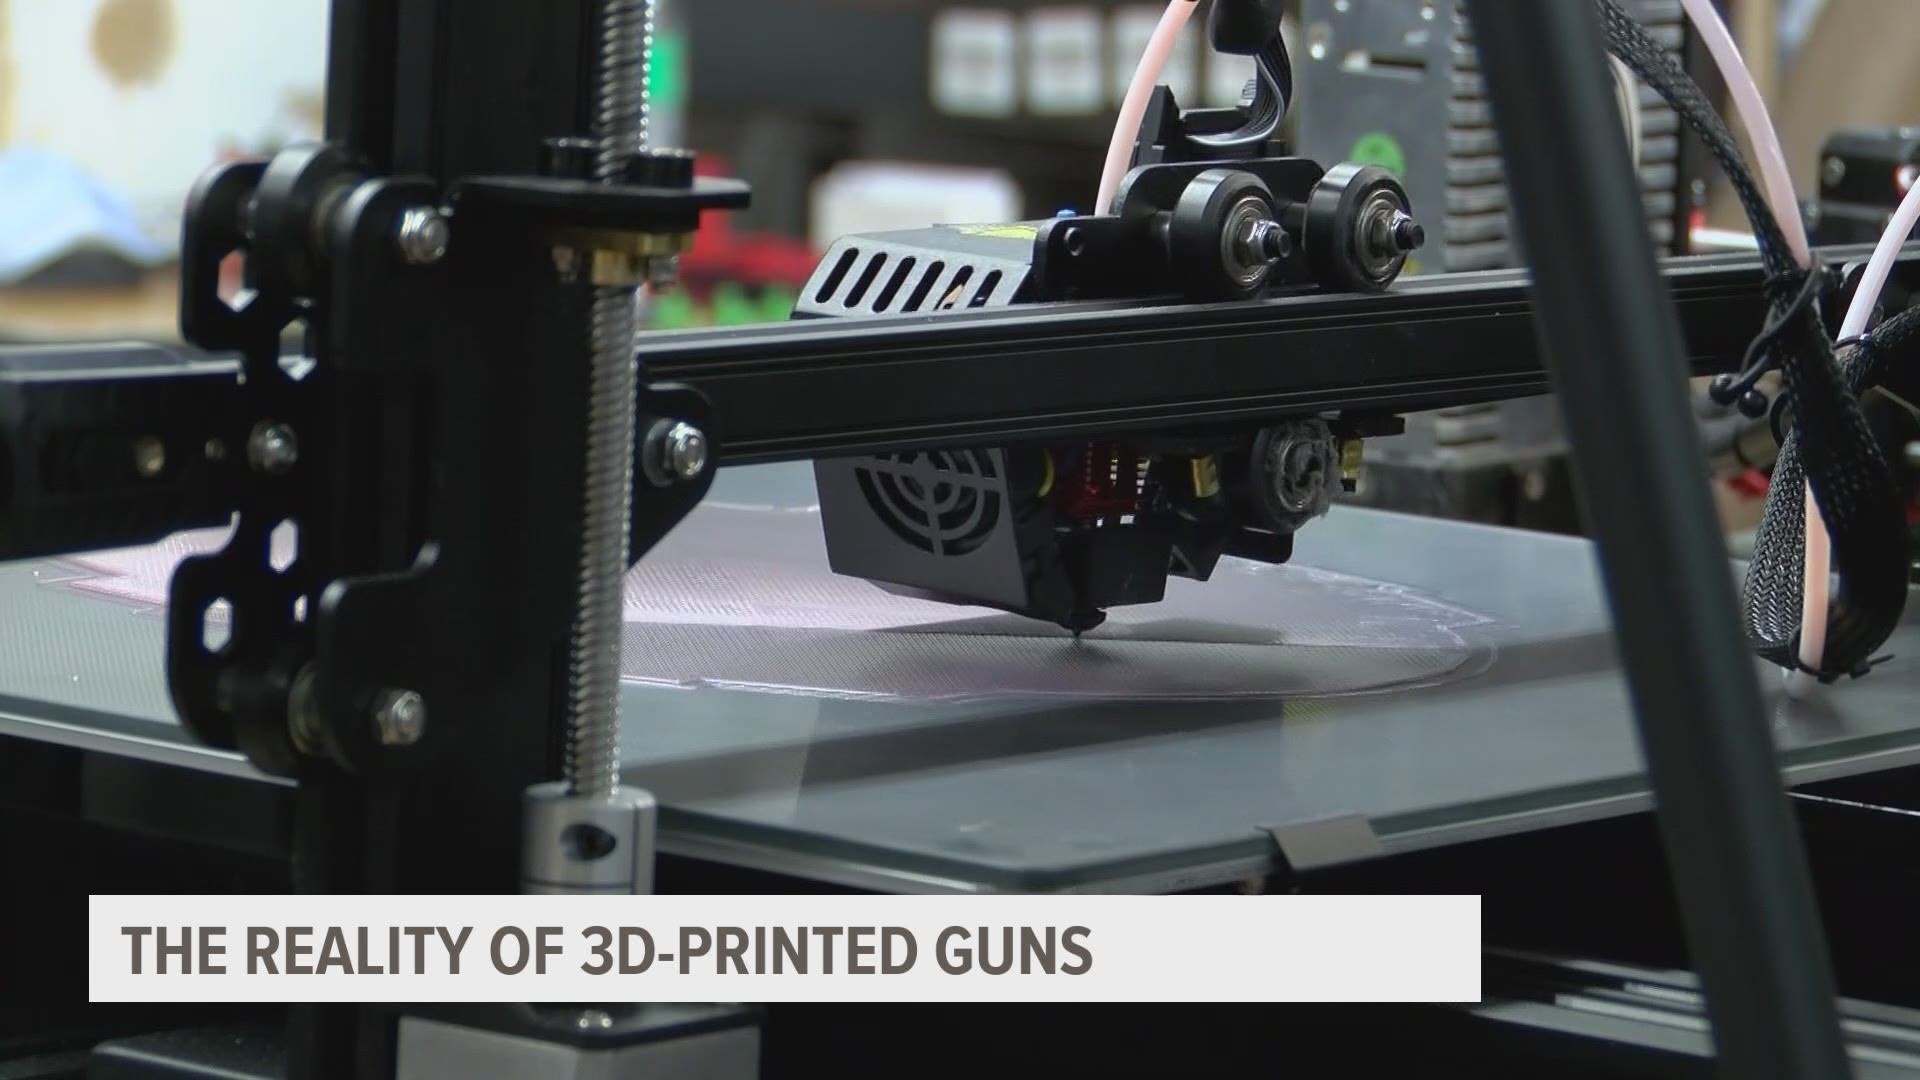 After a mass email was sent to Iowa State students about 3D-printed guns, Local 5 looked into the safety of these weapons.